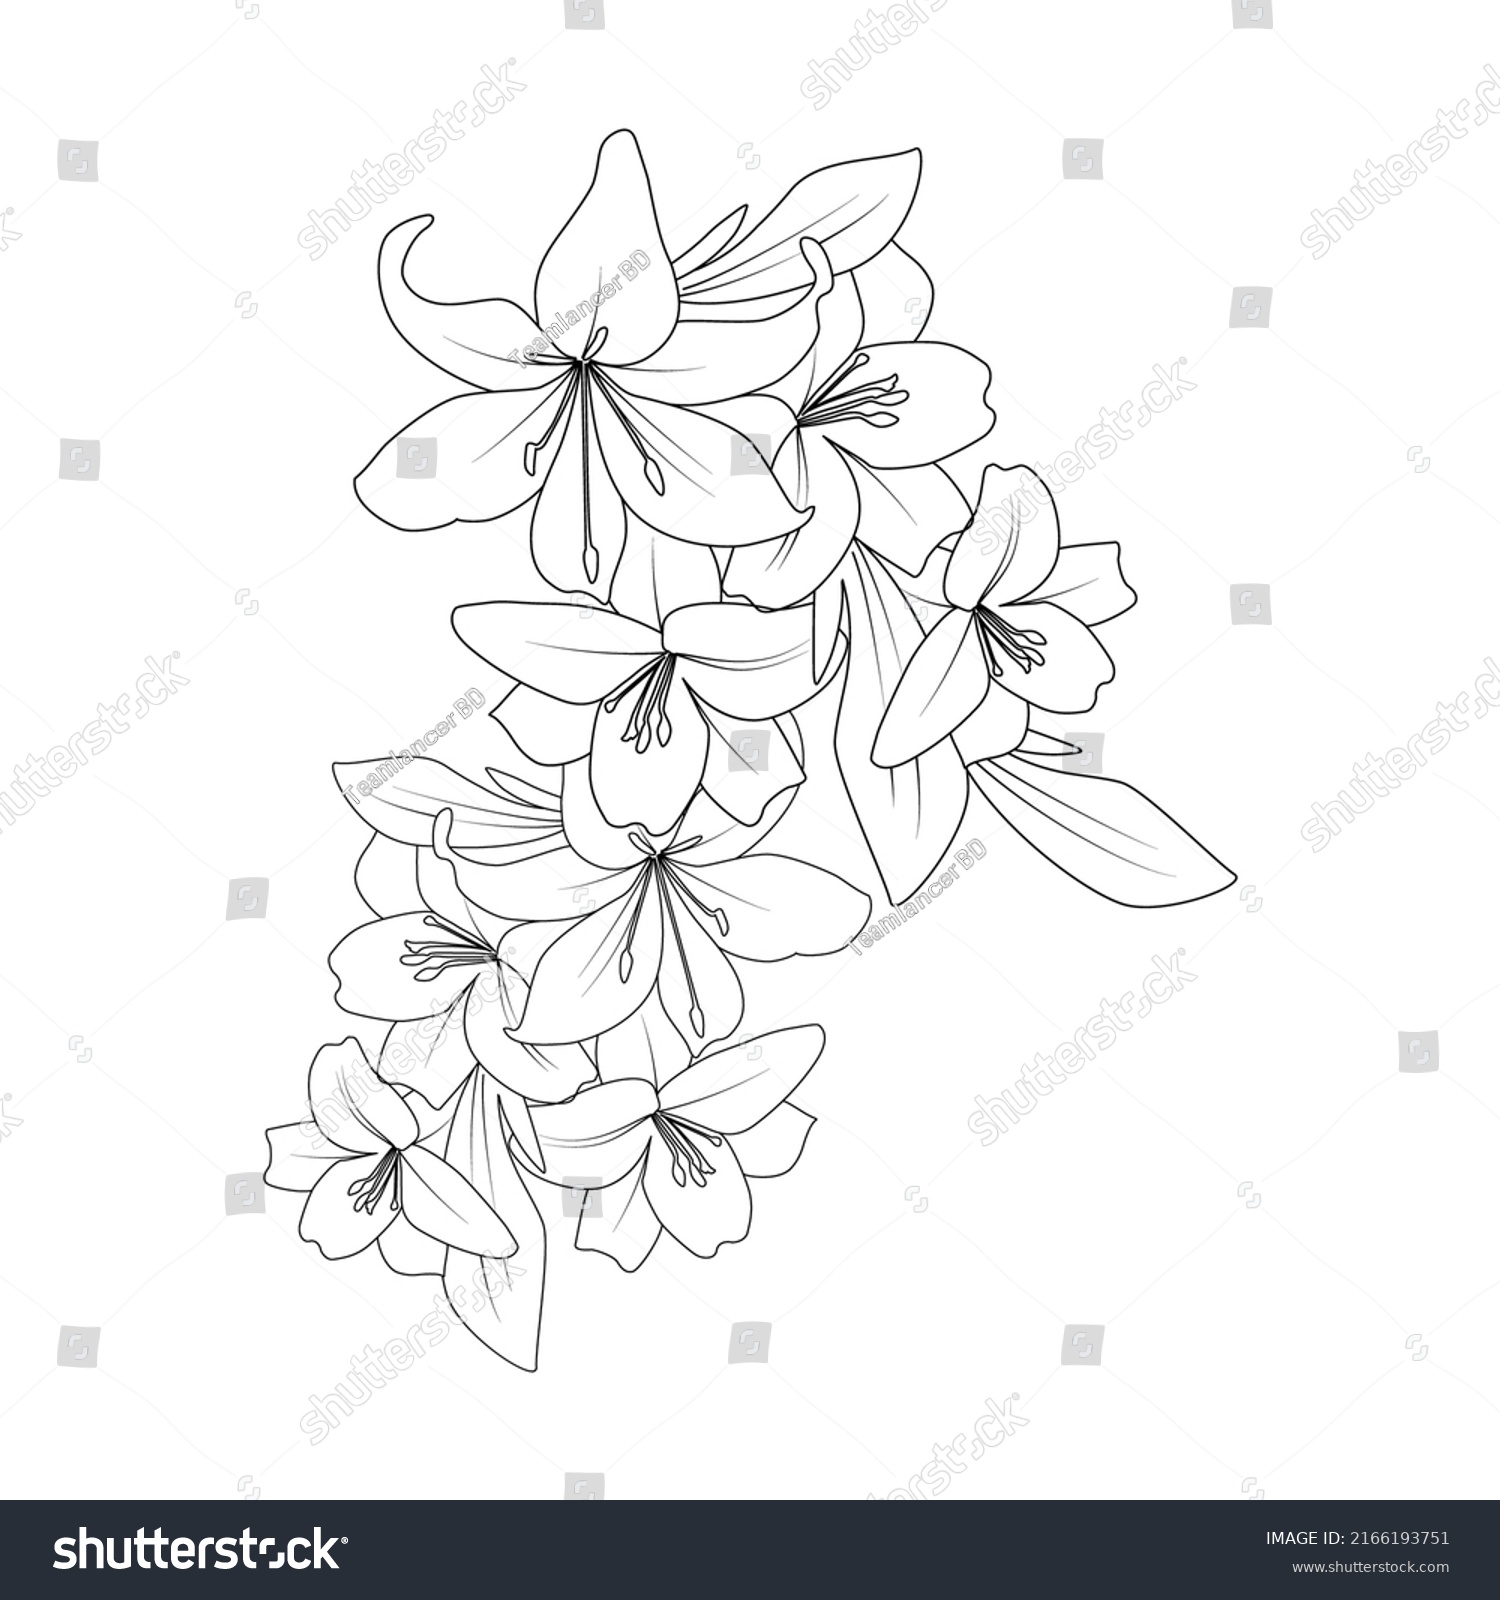 Lily Line Drawing Vector Flower Coloring Stock Vector (Royalty Free ...